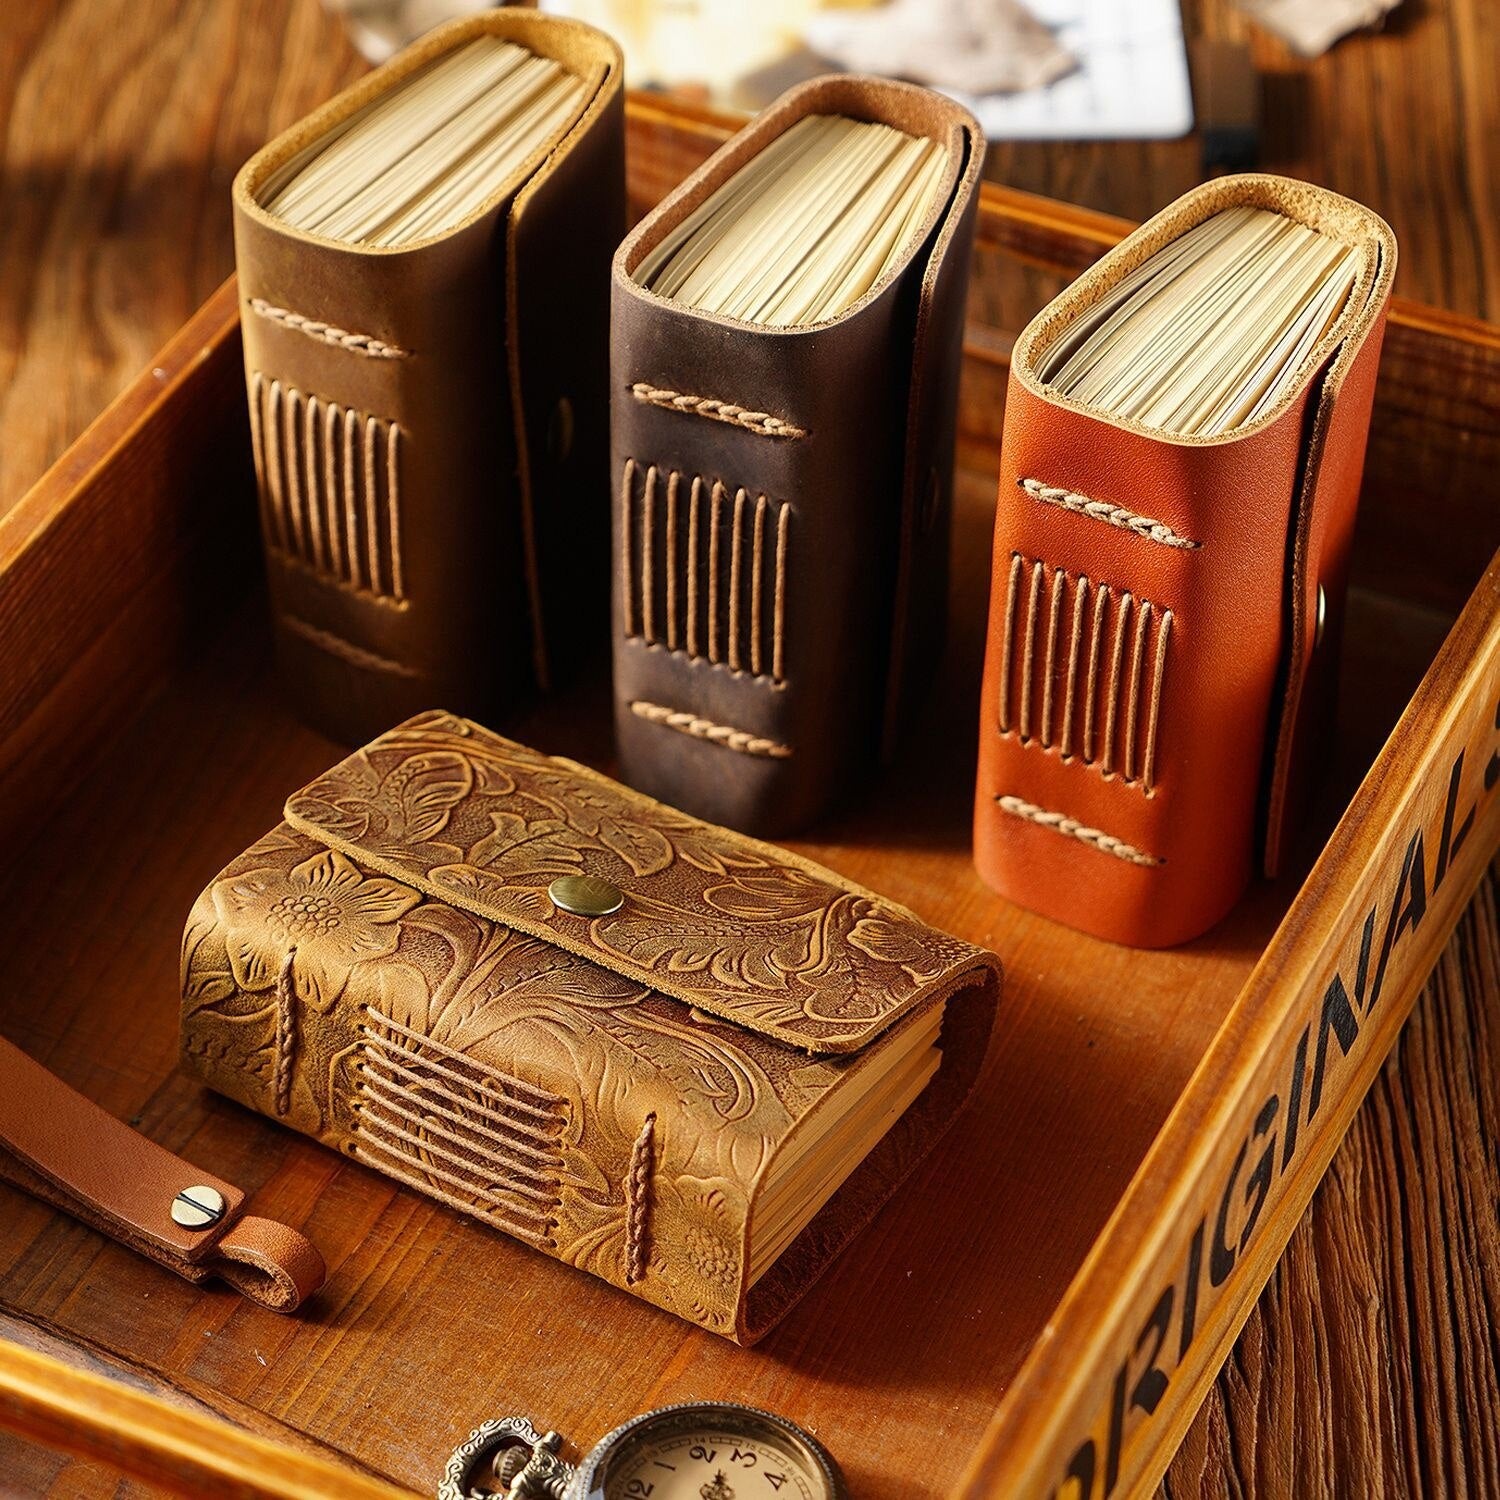 Leather Crafted Miniature Kraft Notebook